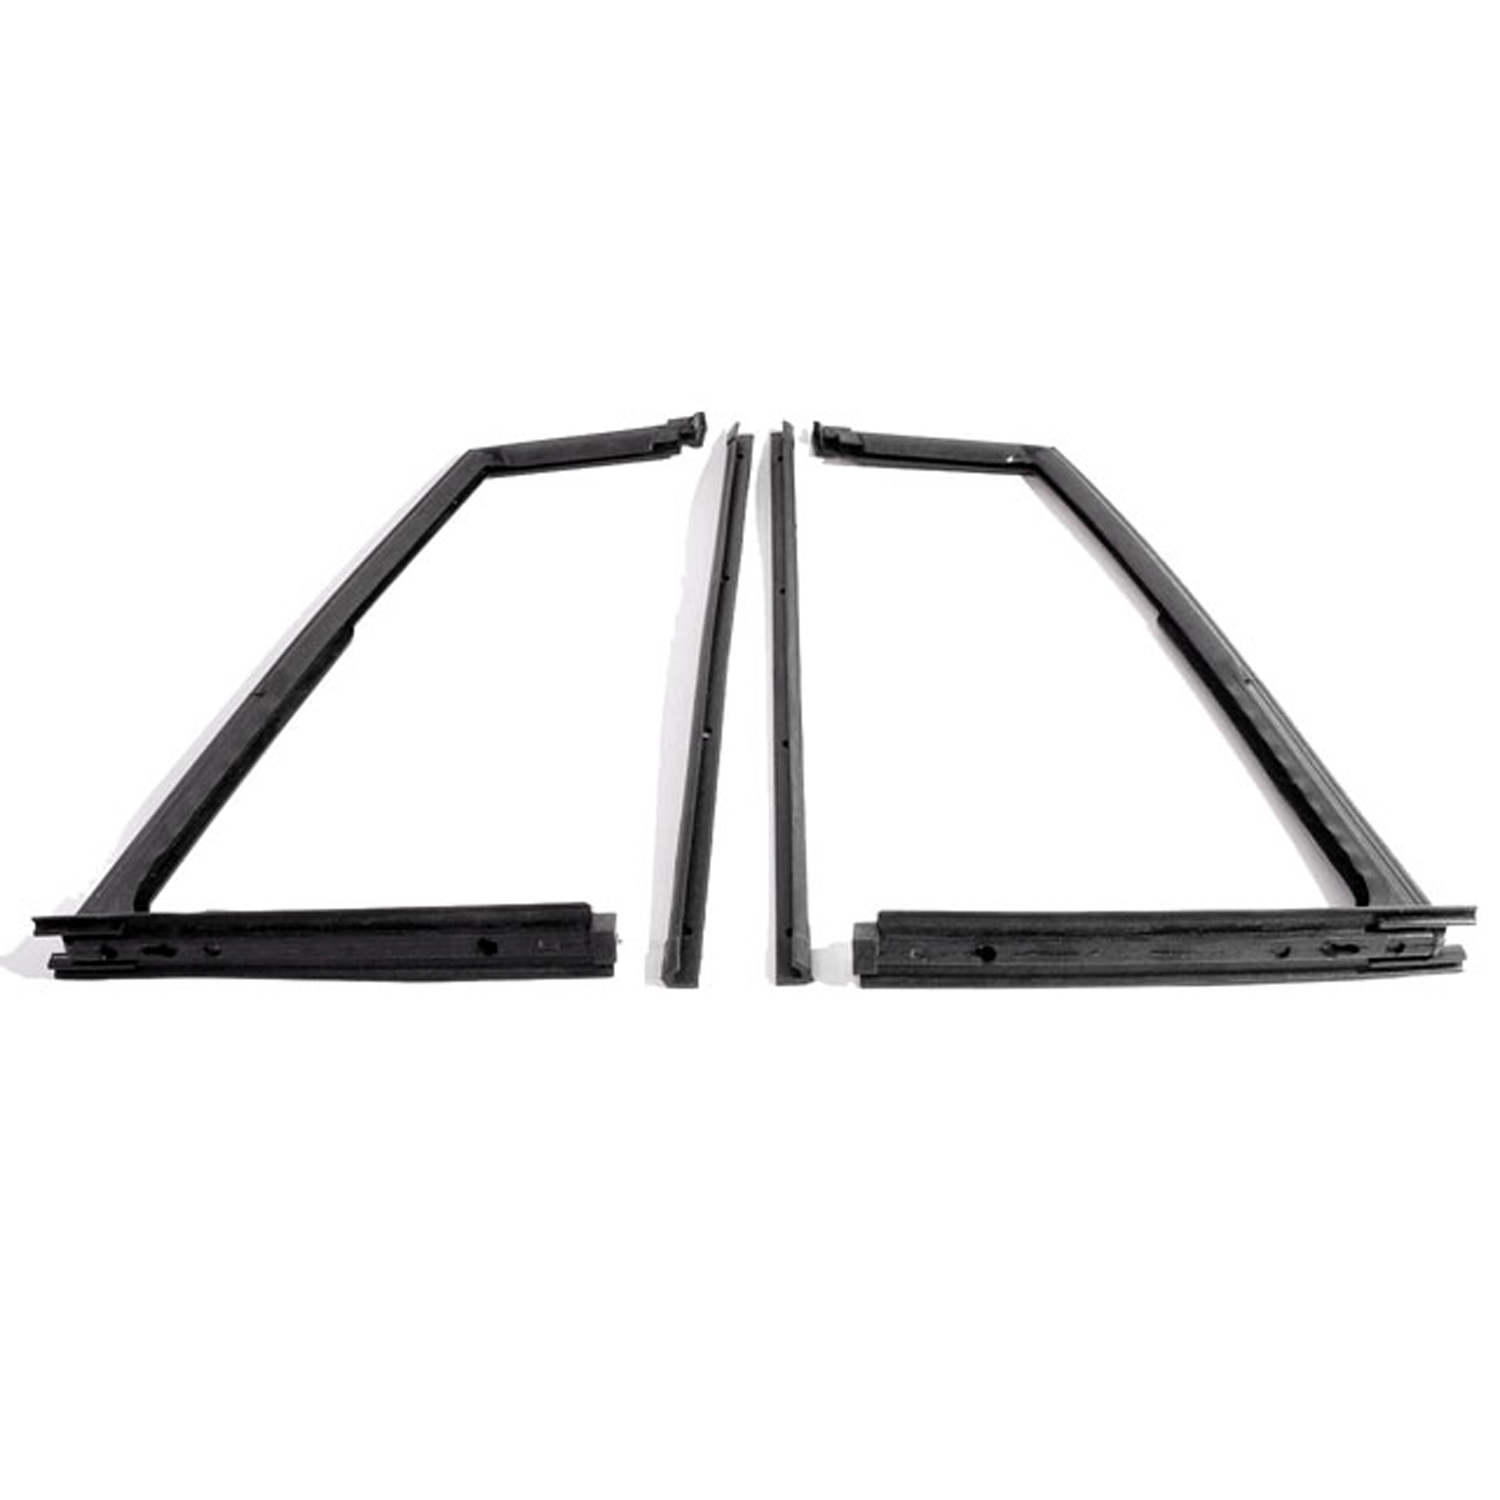 1969 Jeep Jeepster Vent Window Seals.  Pair-WR 9700